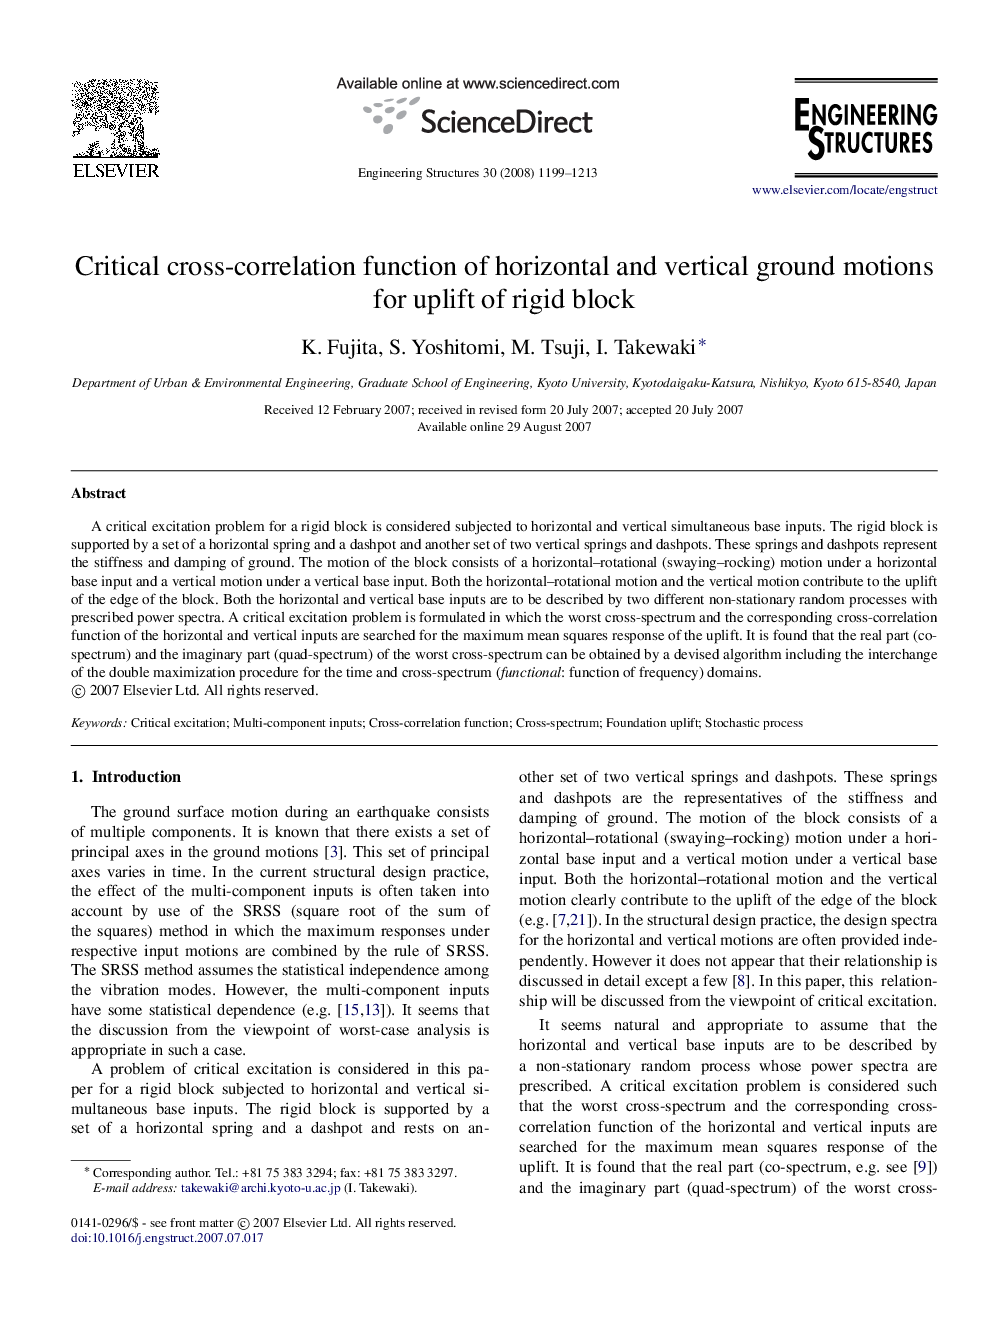 Critical cross-correlation function of horizontal and vertical ground motions for uplift of rigid block